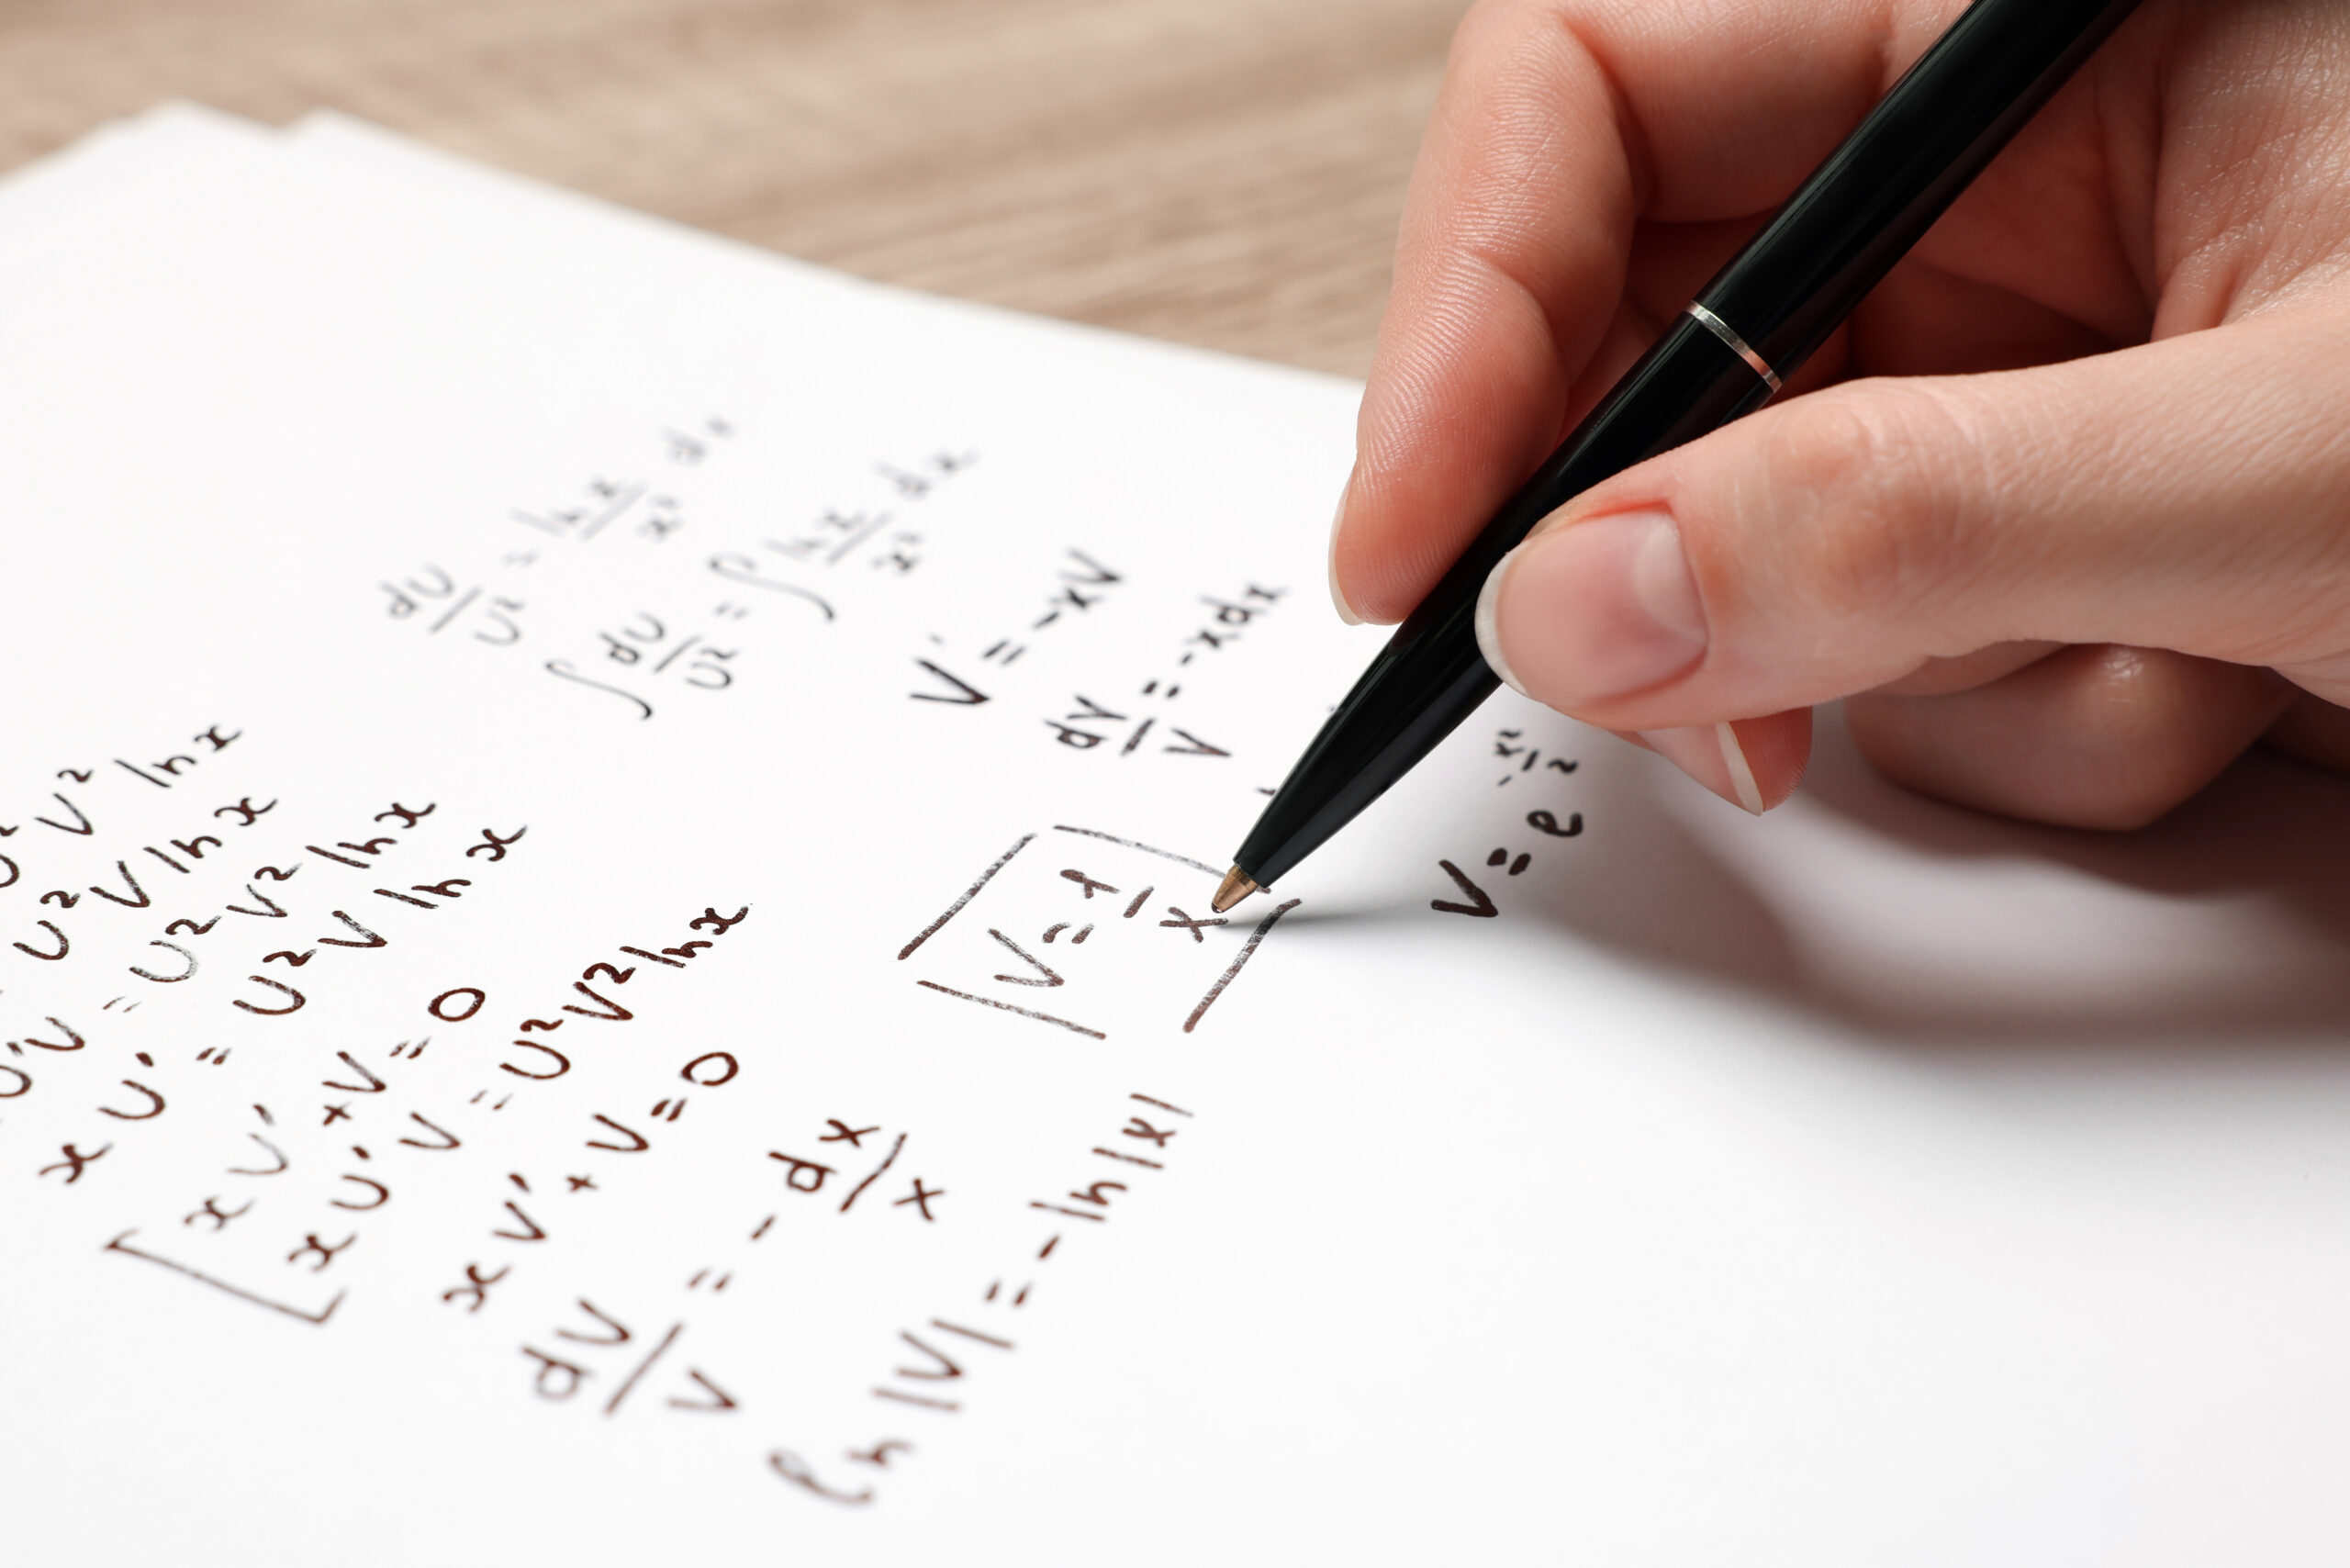 female hand solving mathematical problems on paper